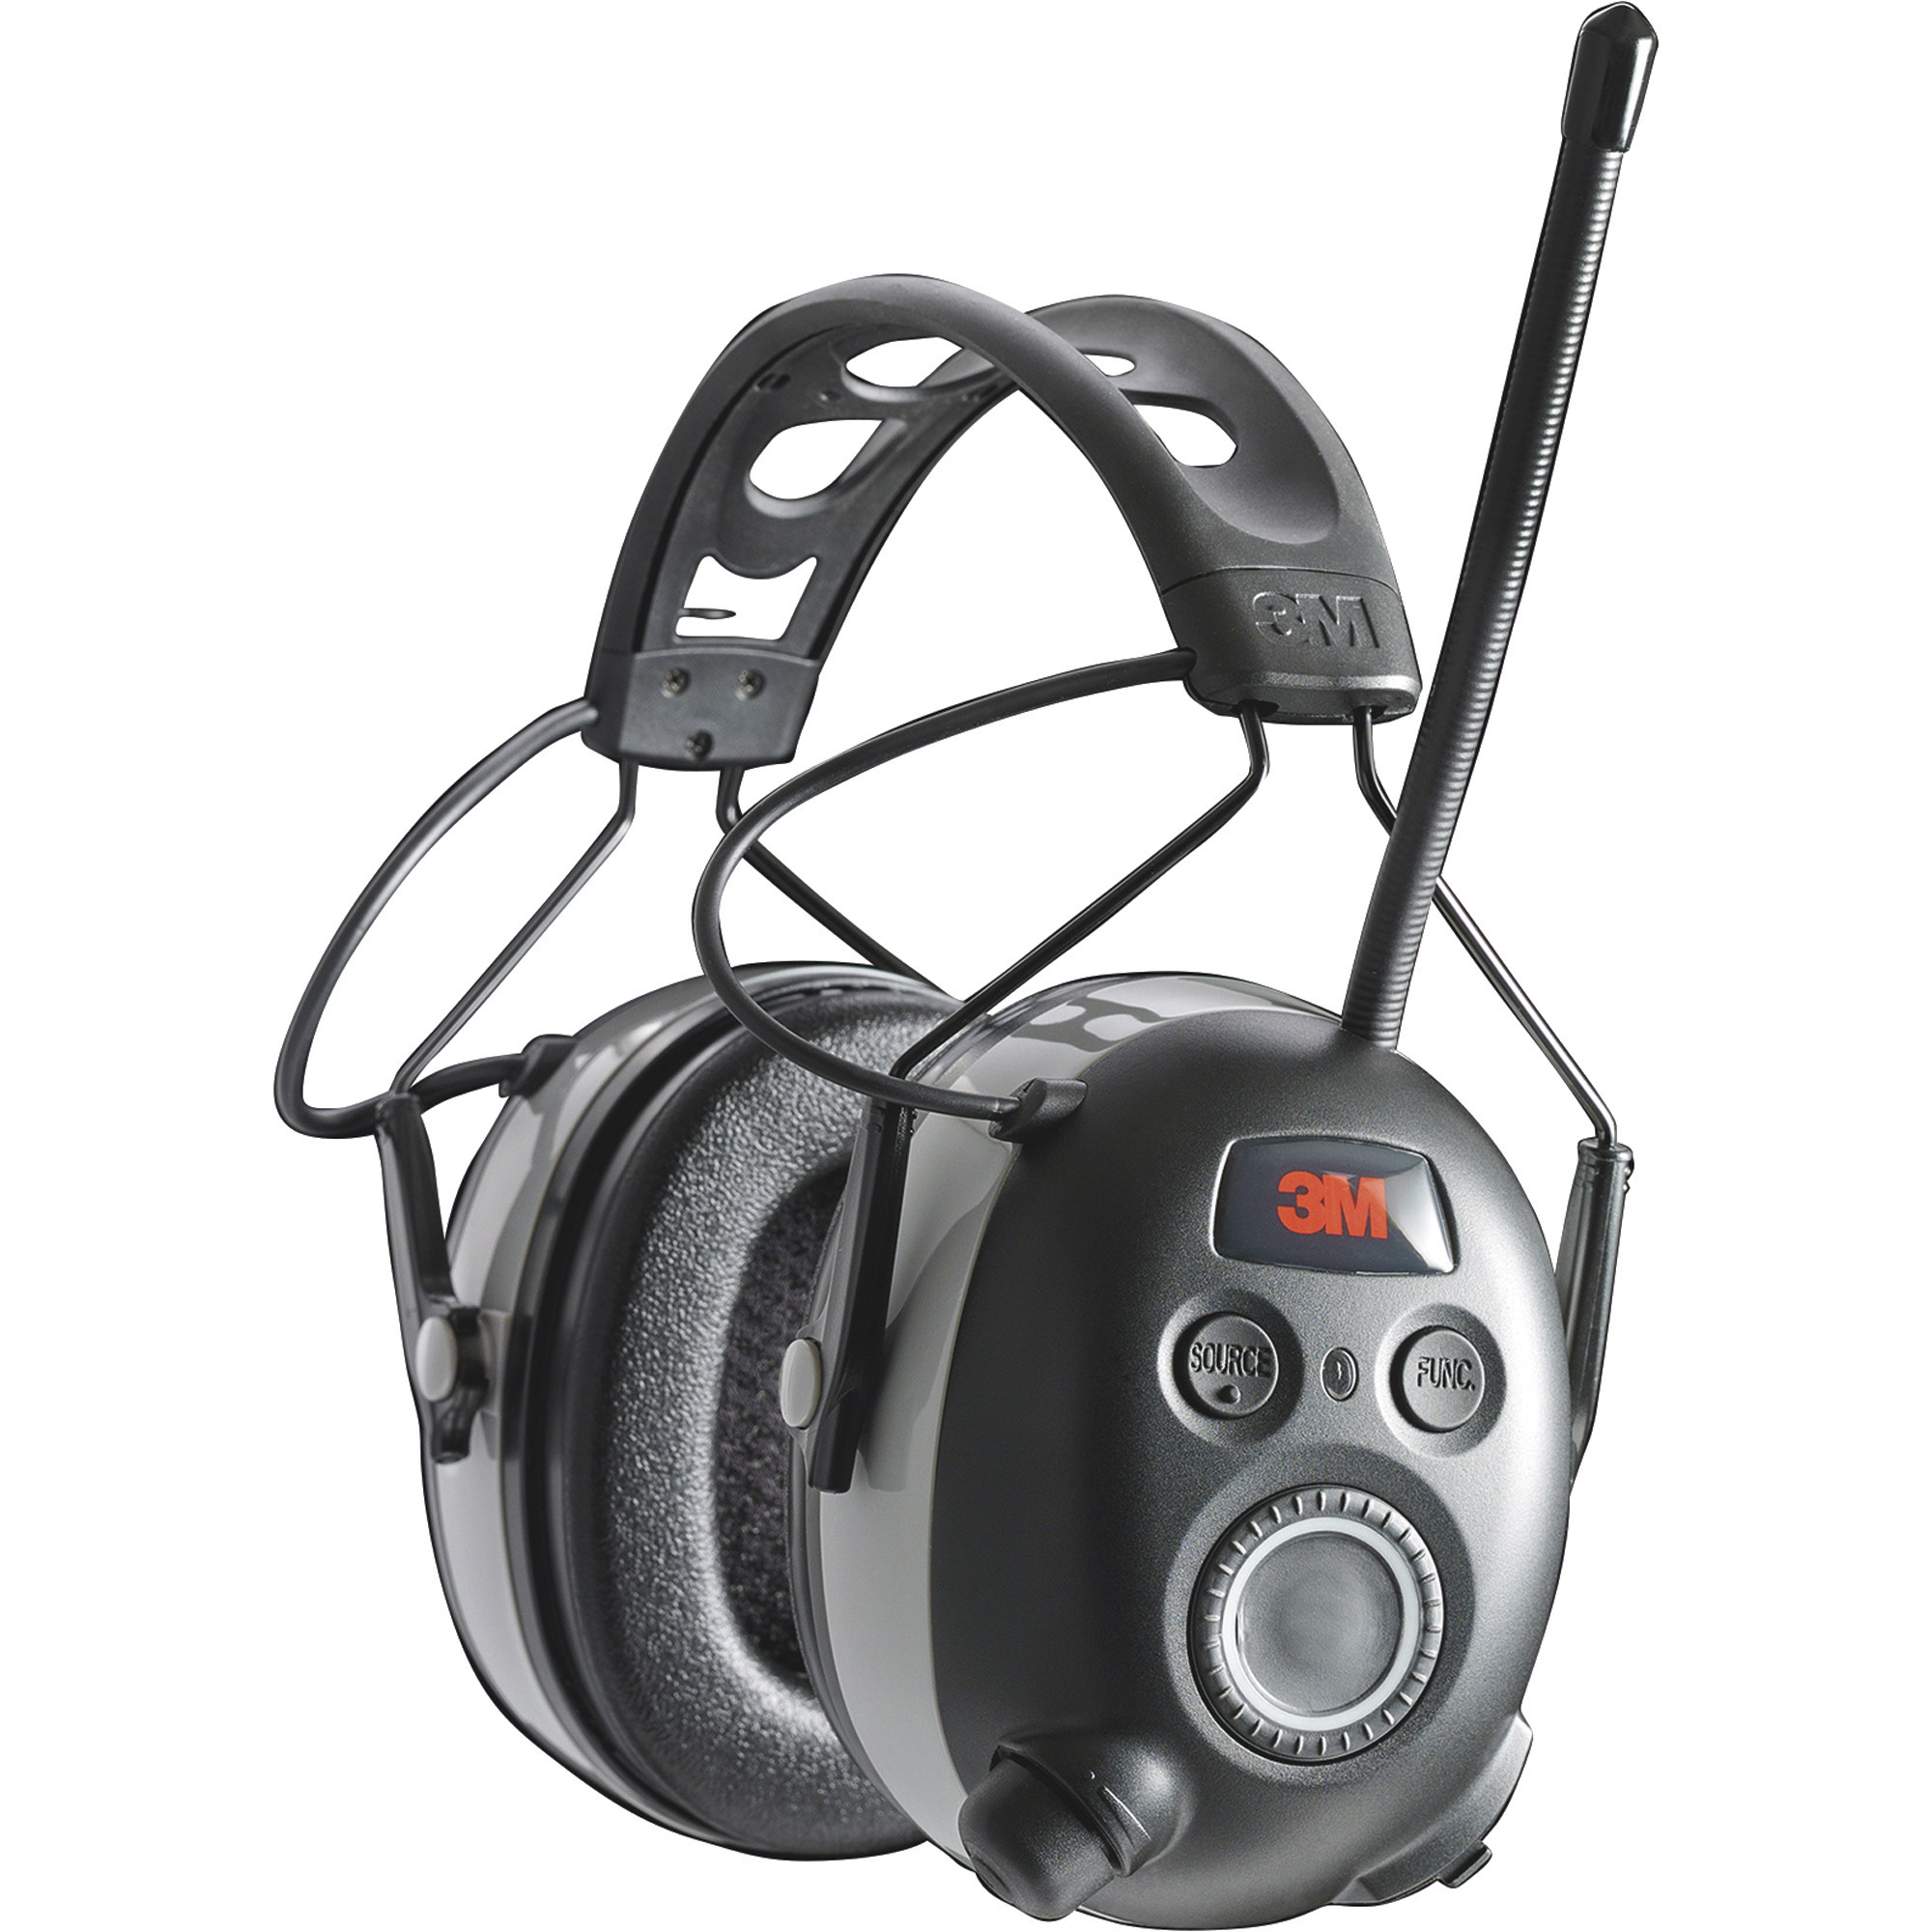 3M WorkTunes Connect AM/FM Radio/MP3 Hearing Protector with Bluetooth  Technology, NRR 24dB, Model# 90542-3DC